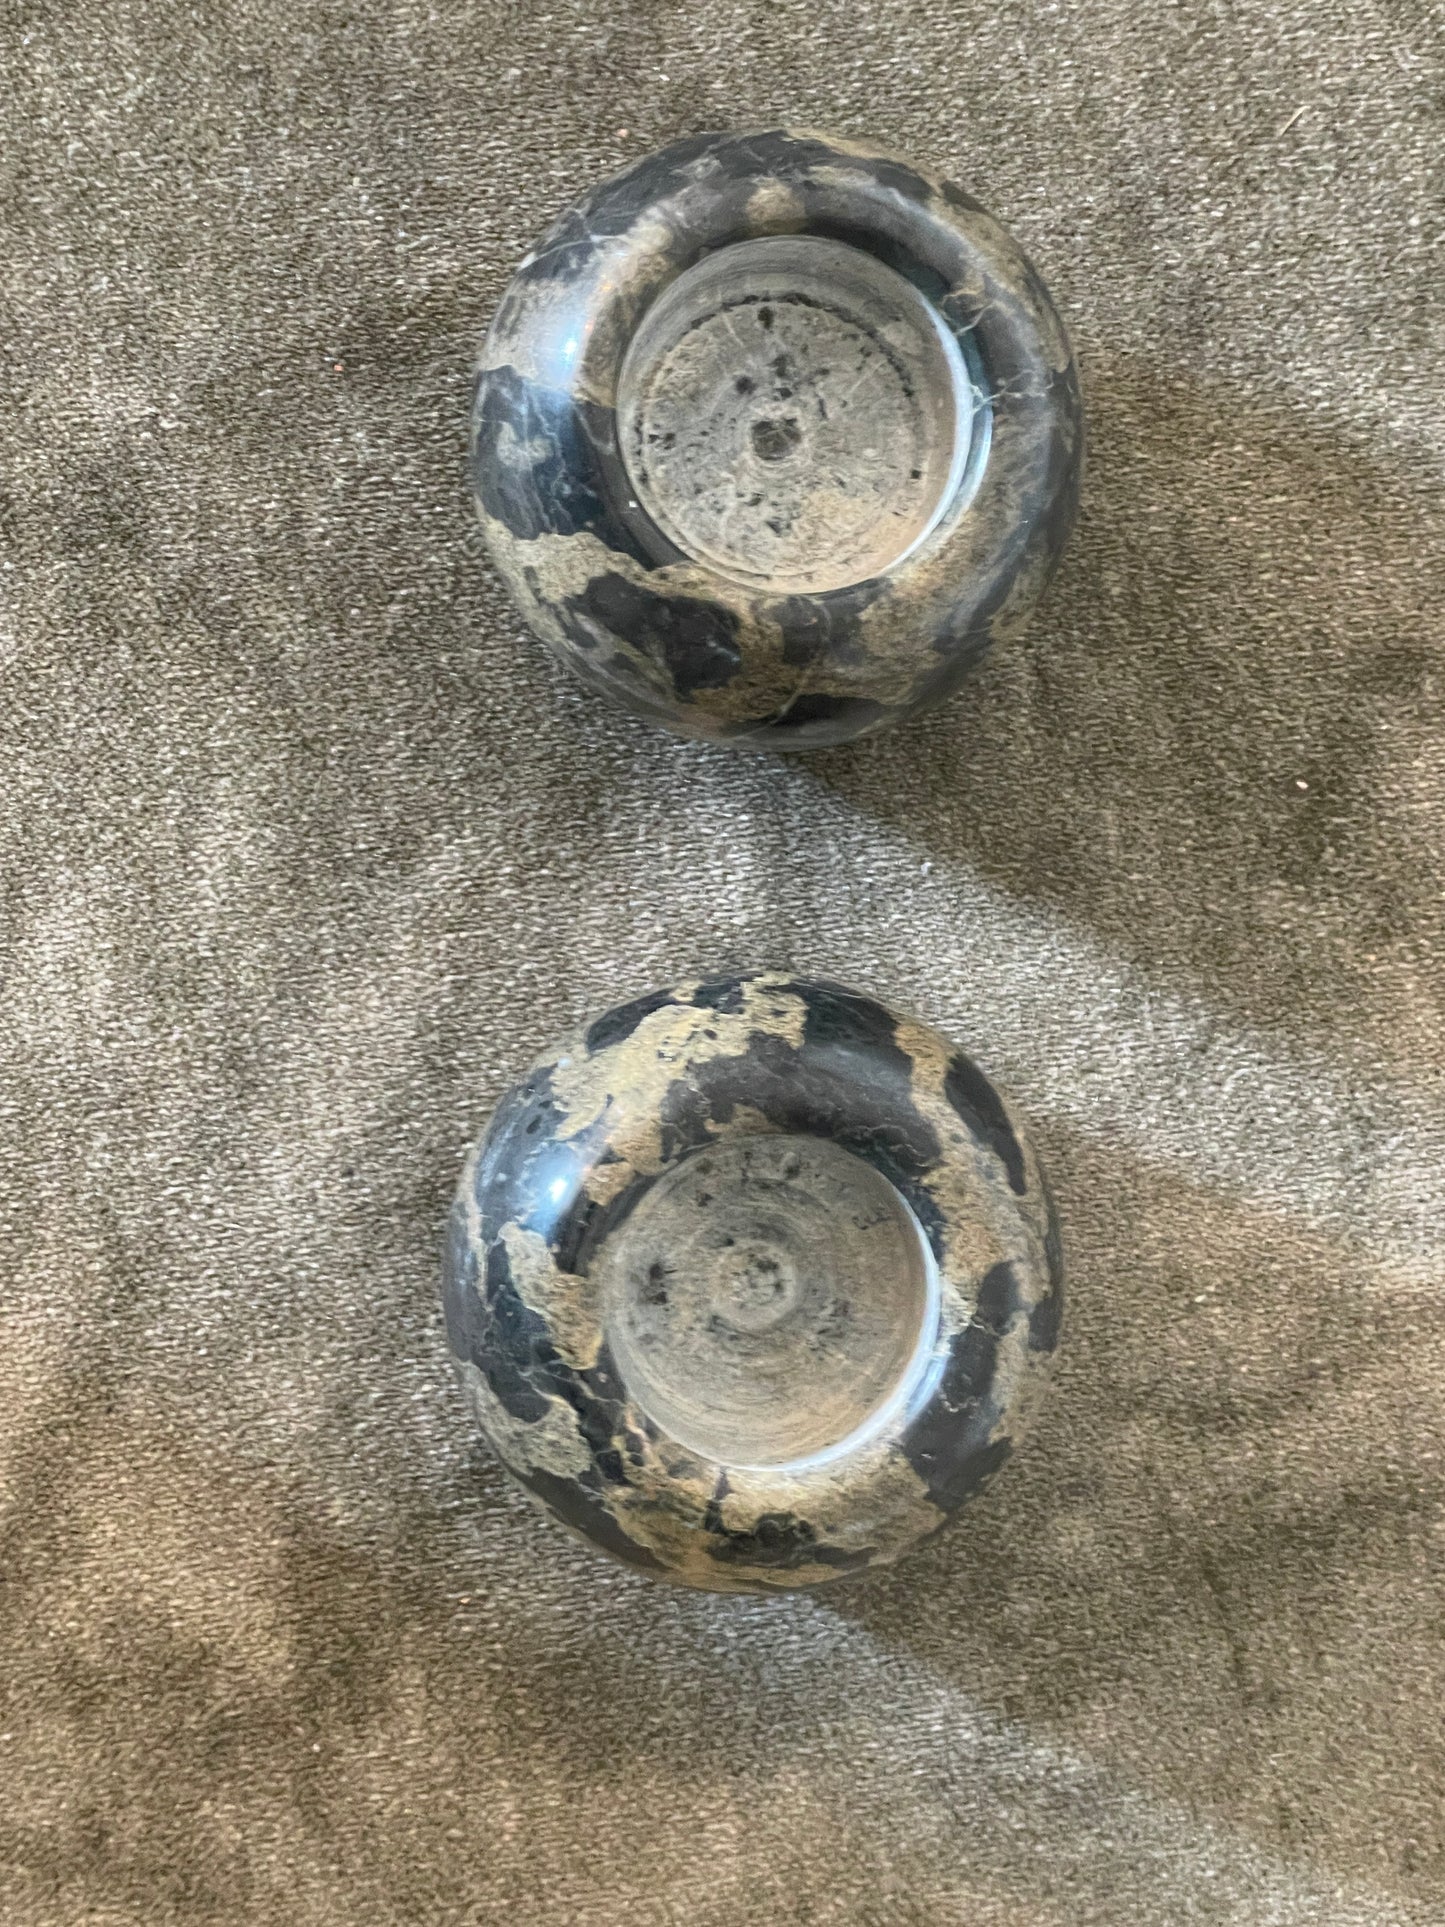 Pair of Black and Taupe Veined Marble Tea Light Candle Holders